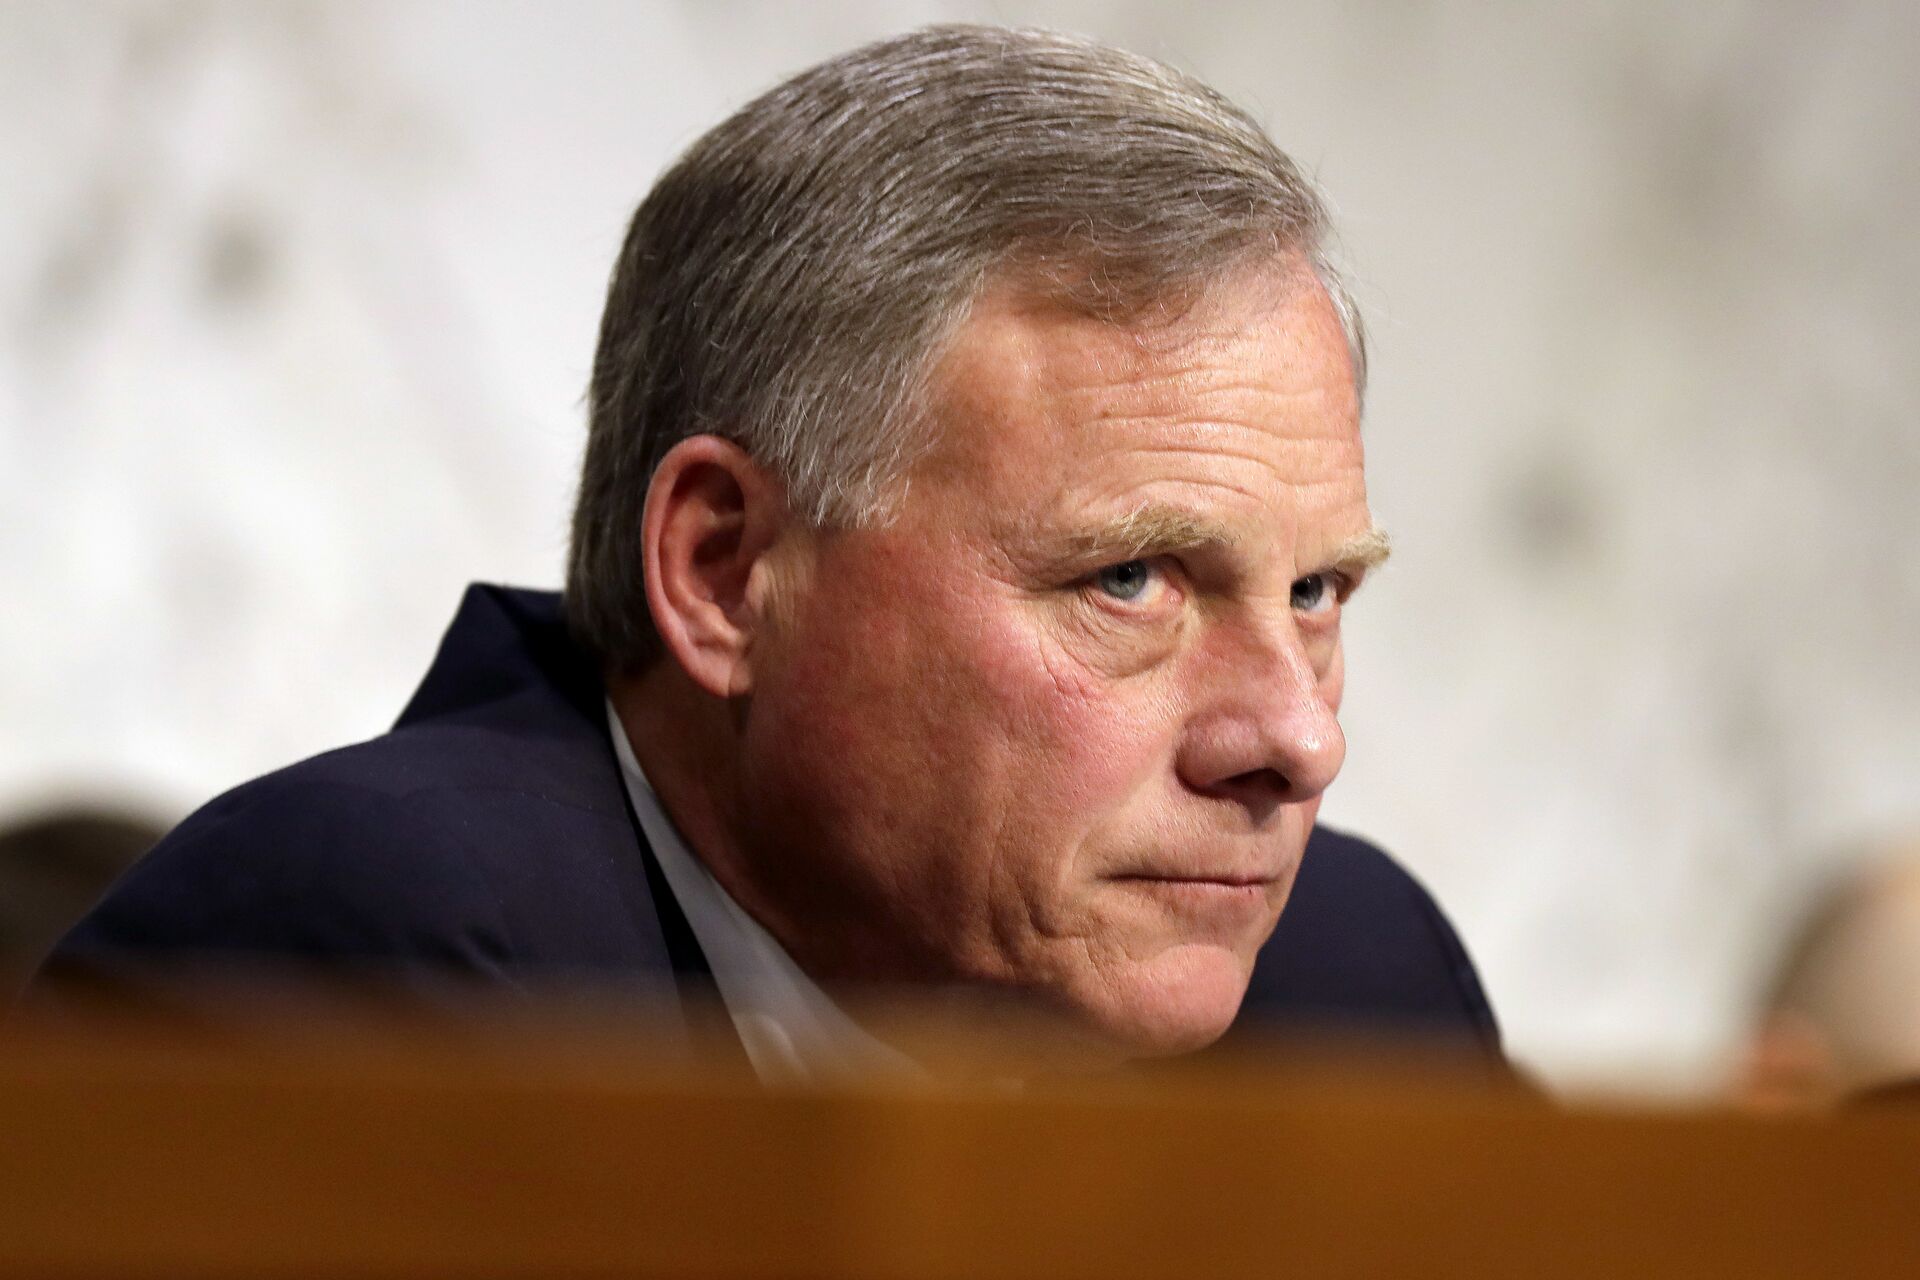 Senate Intelligence Committee Chairman Sen. Richard Burr, R-N.C. listens on Capitol Hill in Washington. Democratic lawmakers and rights groups criticized Burr on June 2, 2017, for seeking the return of copies of a report on CIA treatment of detainees after 9/11, saying he is trying to erase history - Sputnik International, 1920, 15.11.2021